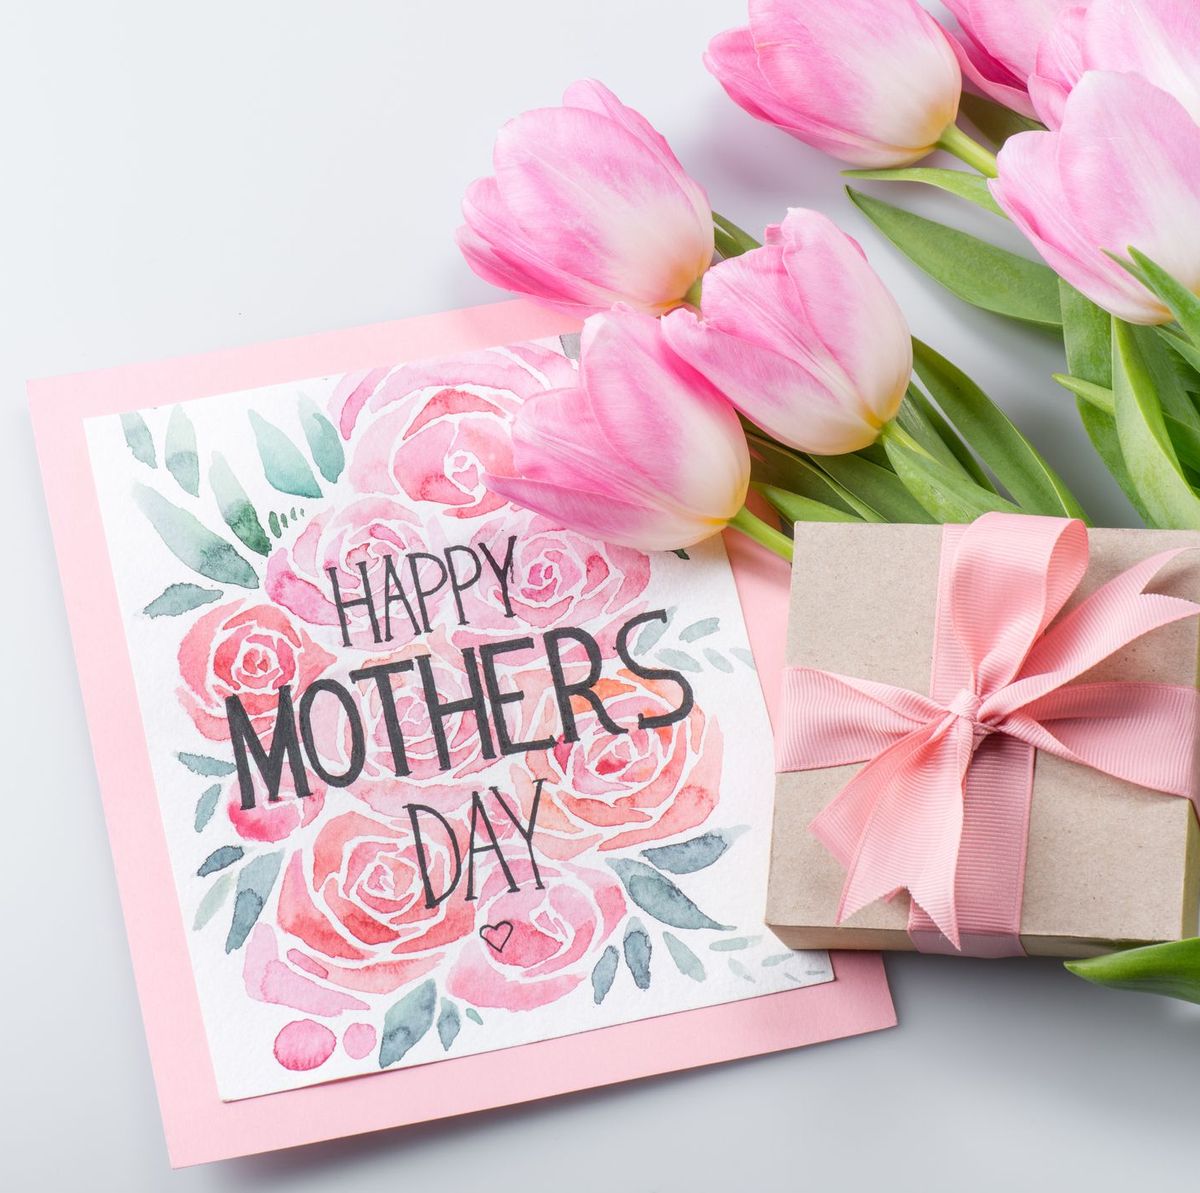 Top 999+ mothers day wishes images – Amazing Collection mothers day wishes images Full 4K